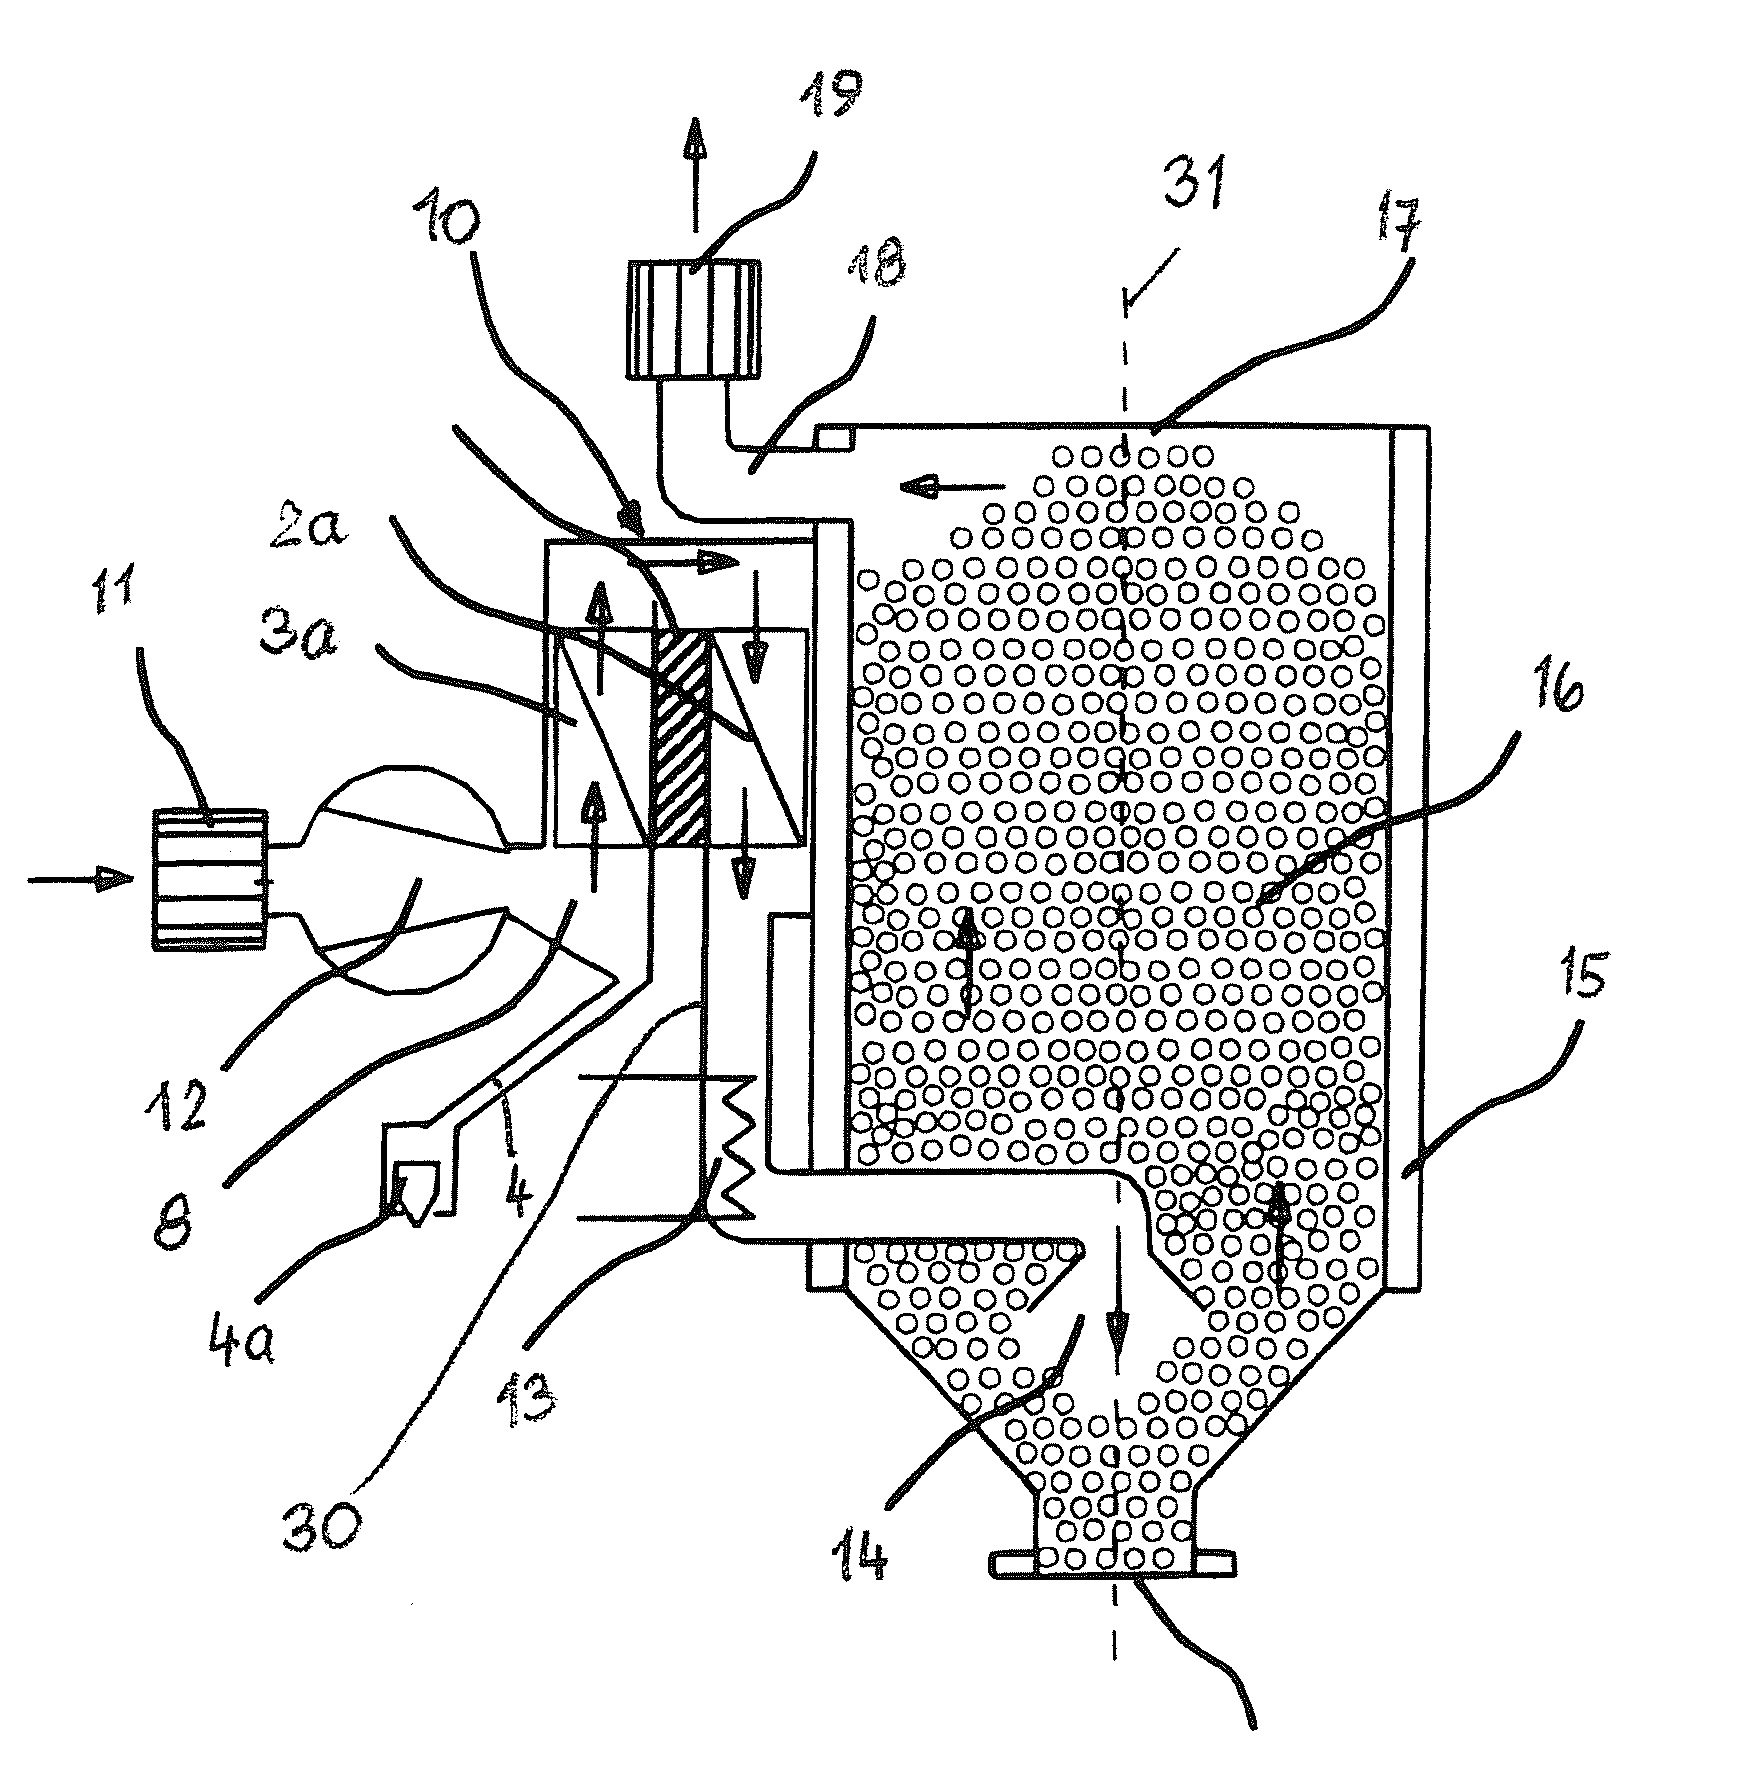 Device for Drying Bulk Material in at least one Storage Container